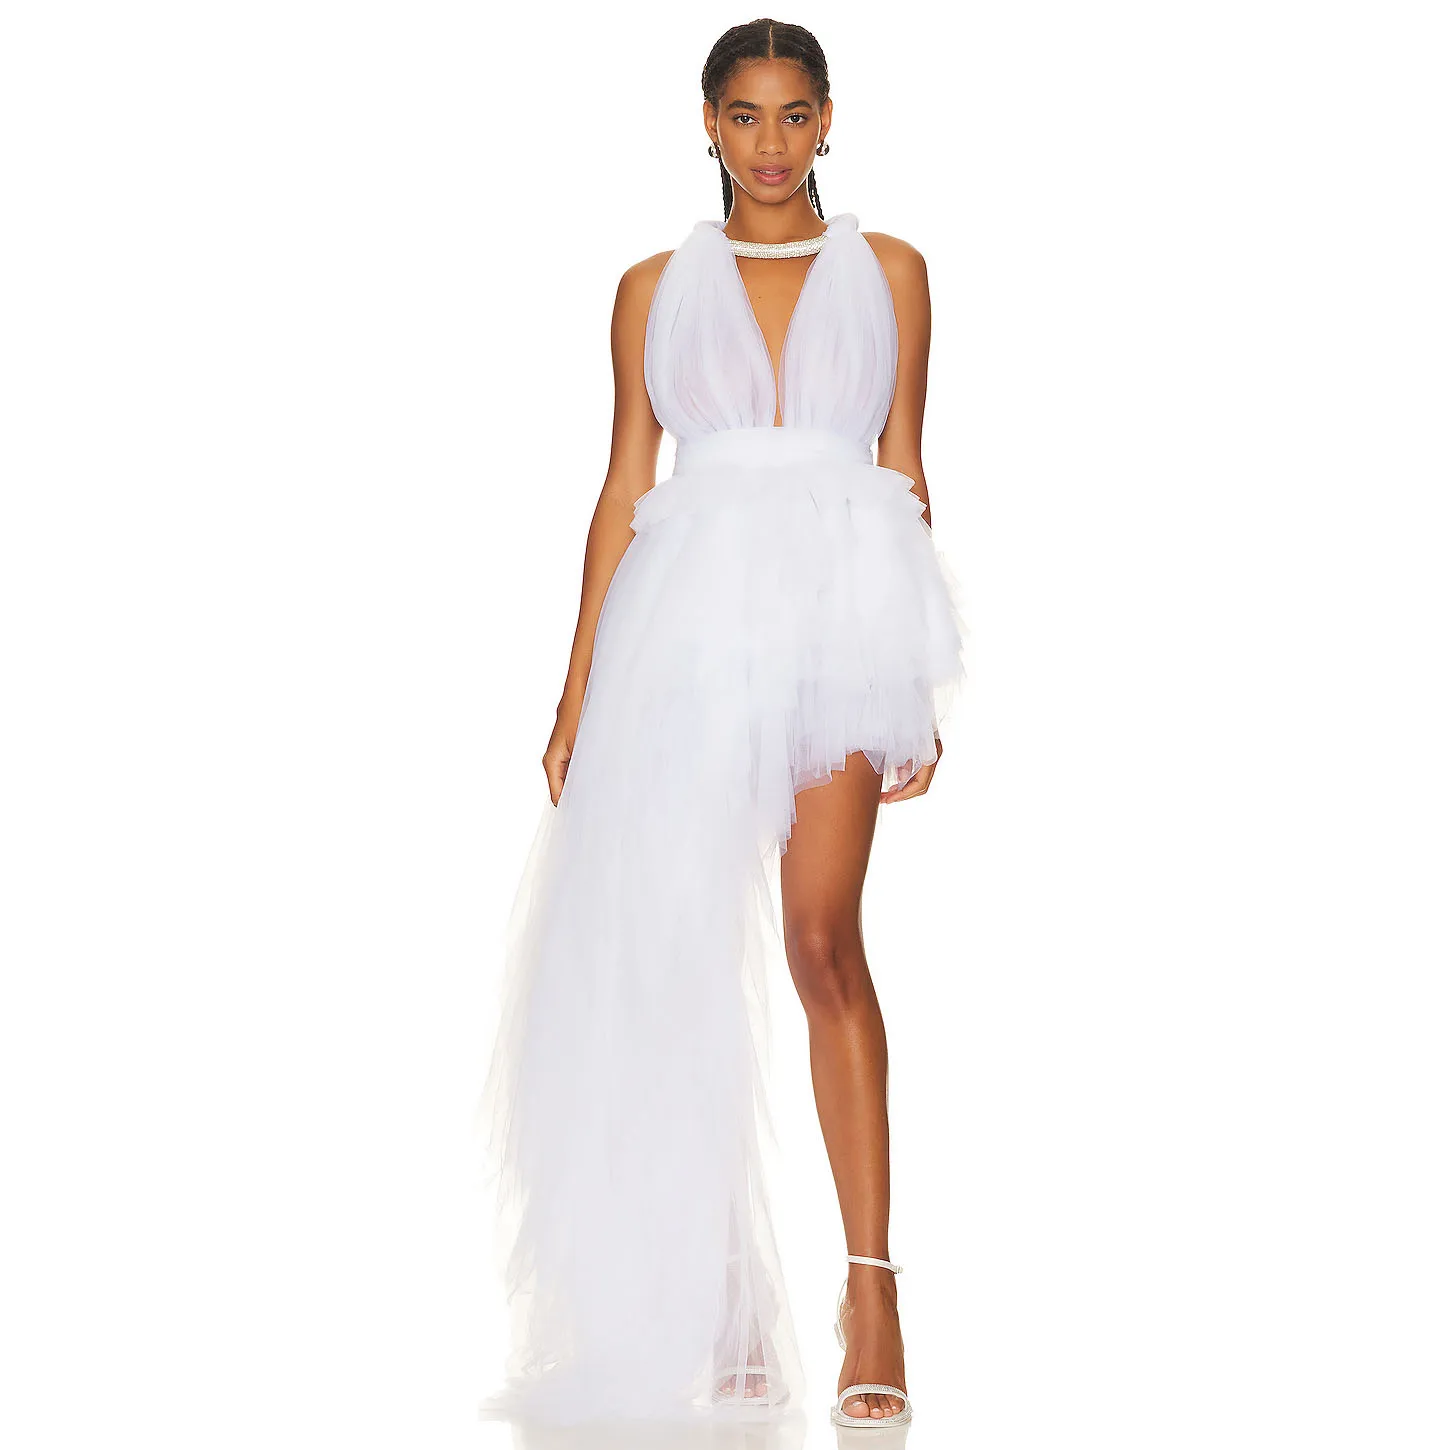 

Pretty White Dresses Fashion Asymmetrical Maxi Dress Off Shoulder robe de soiree Prom Gowns Crystal Layered Tulle Dress Chic